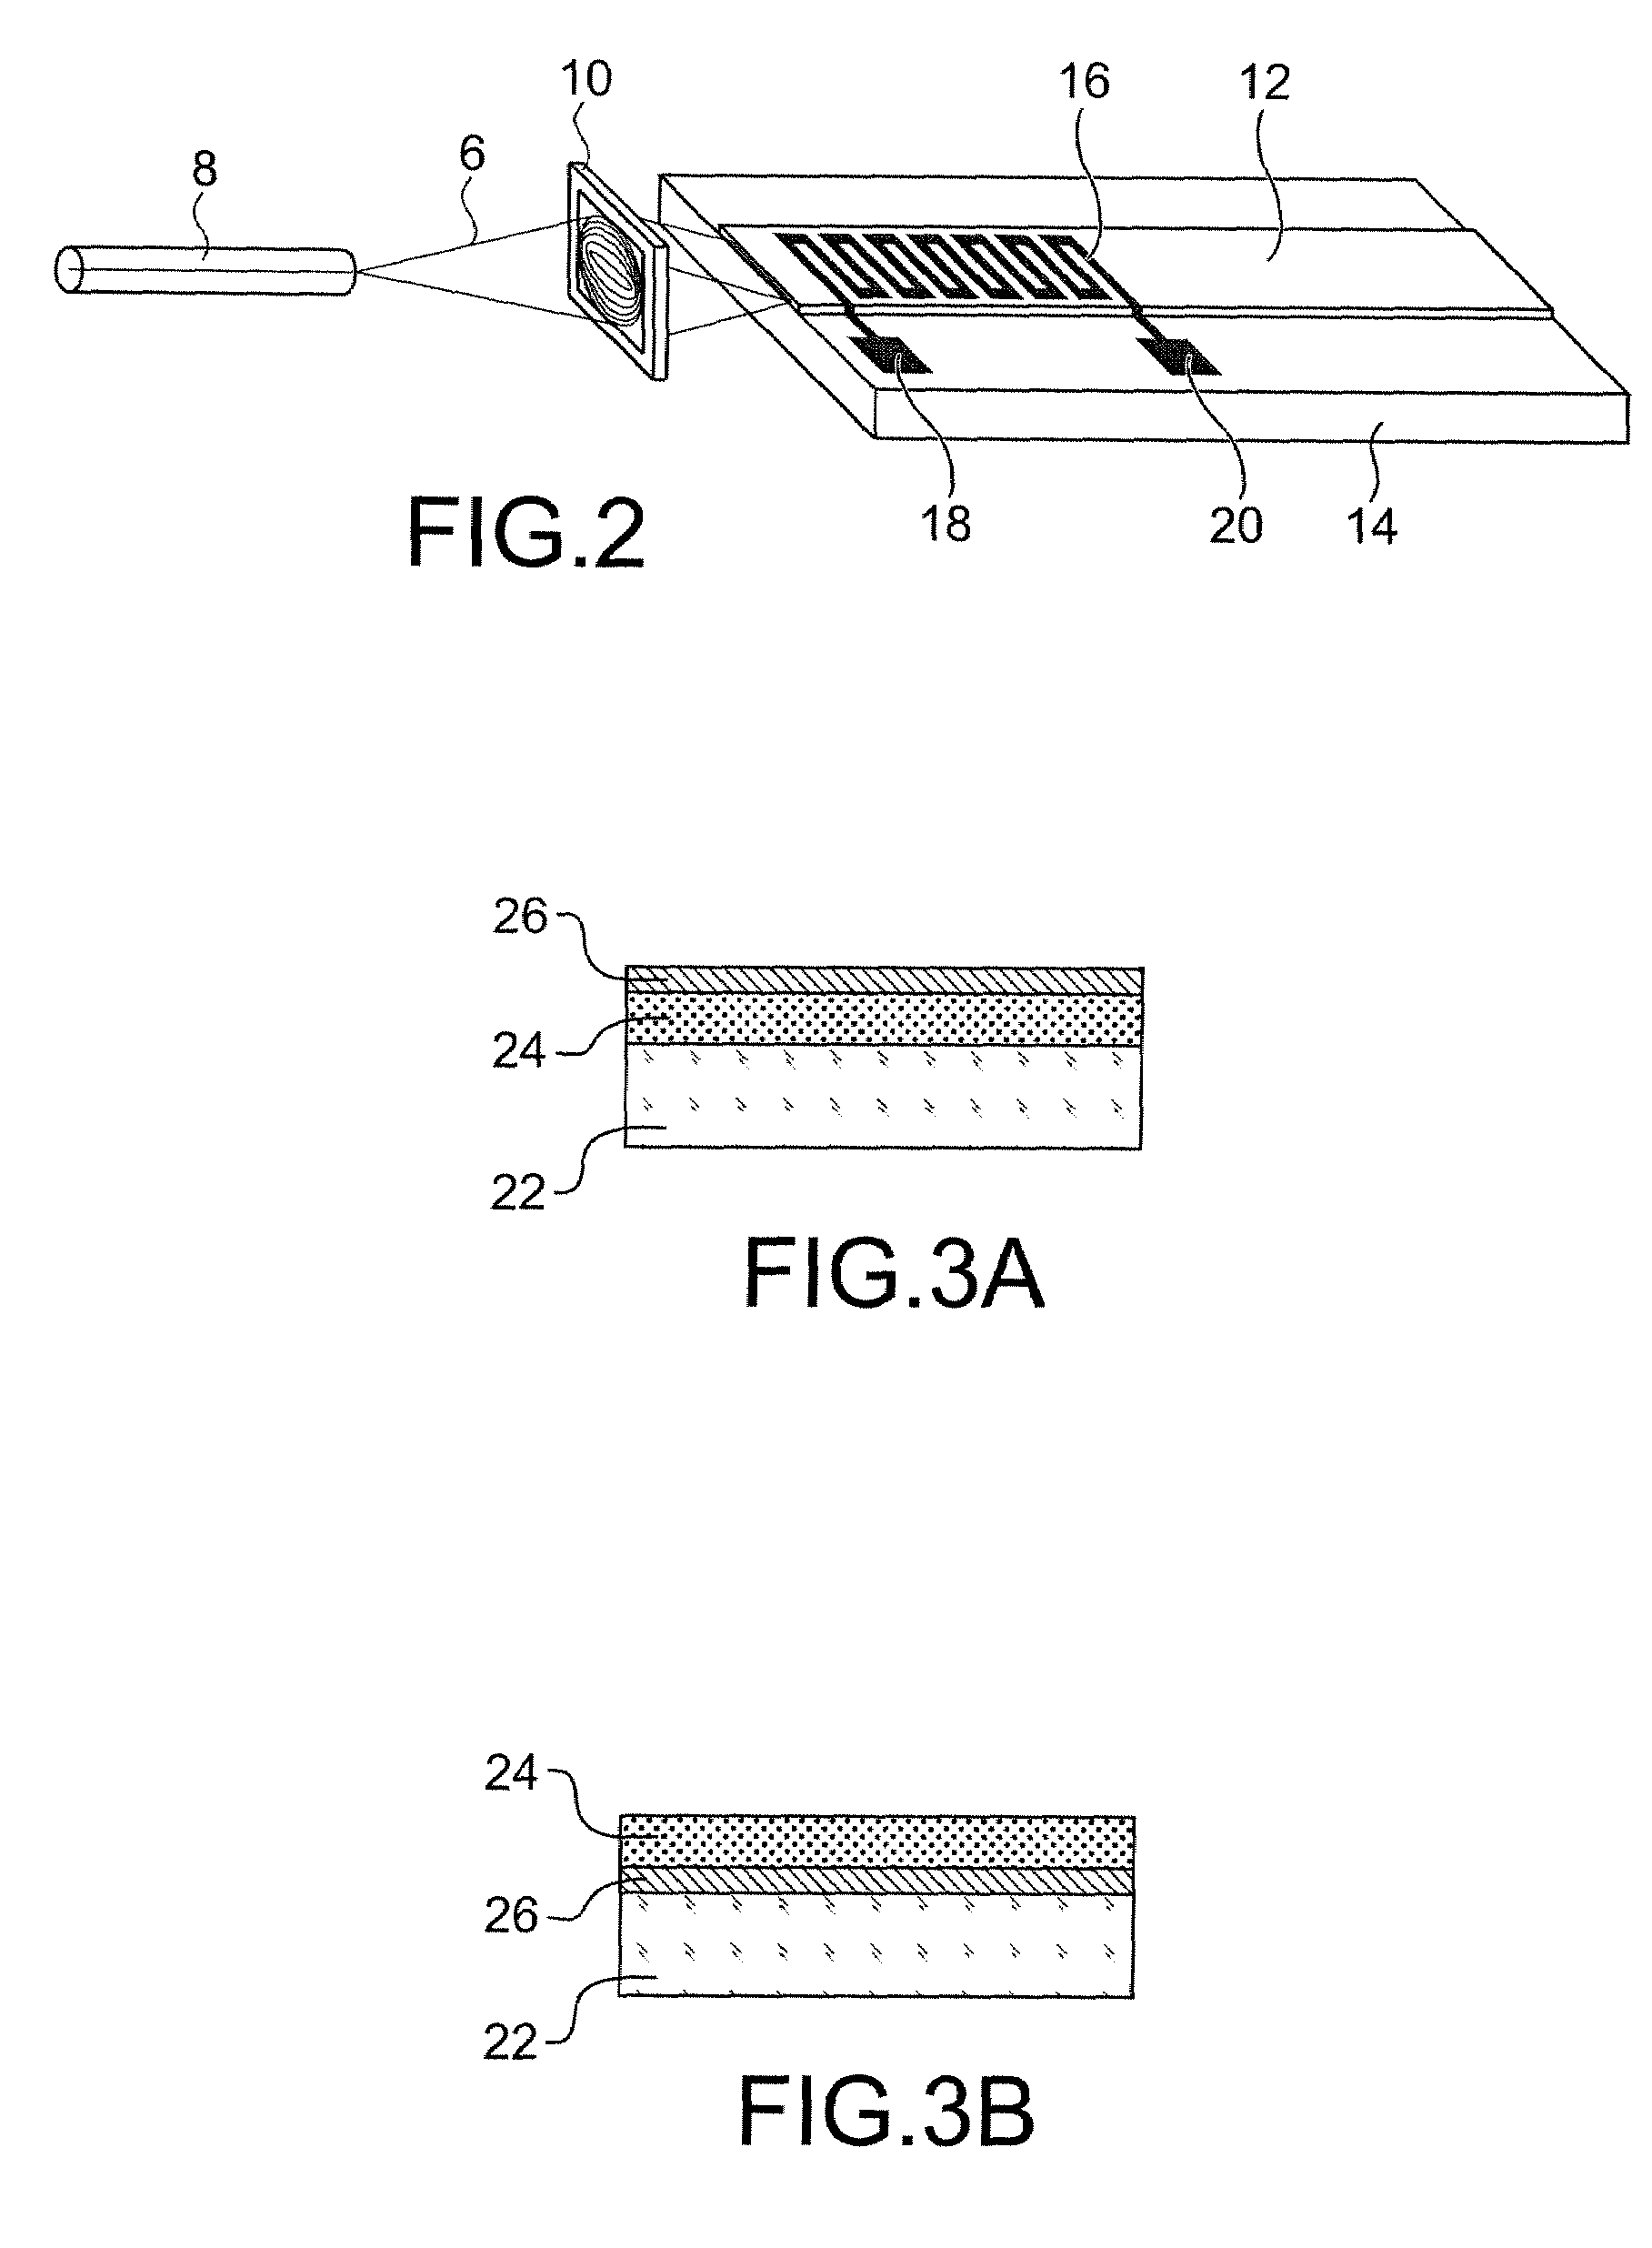 High time-resolution ultrasensitive optical detector, using grating coupling